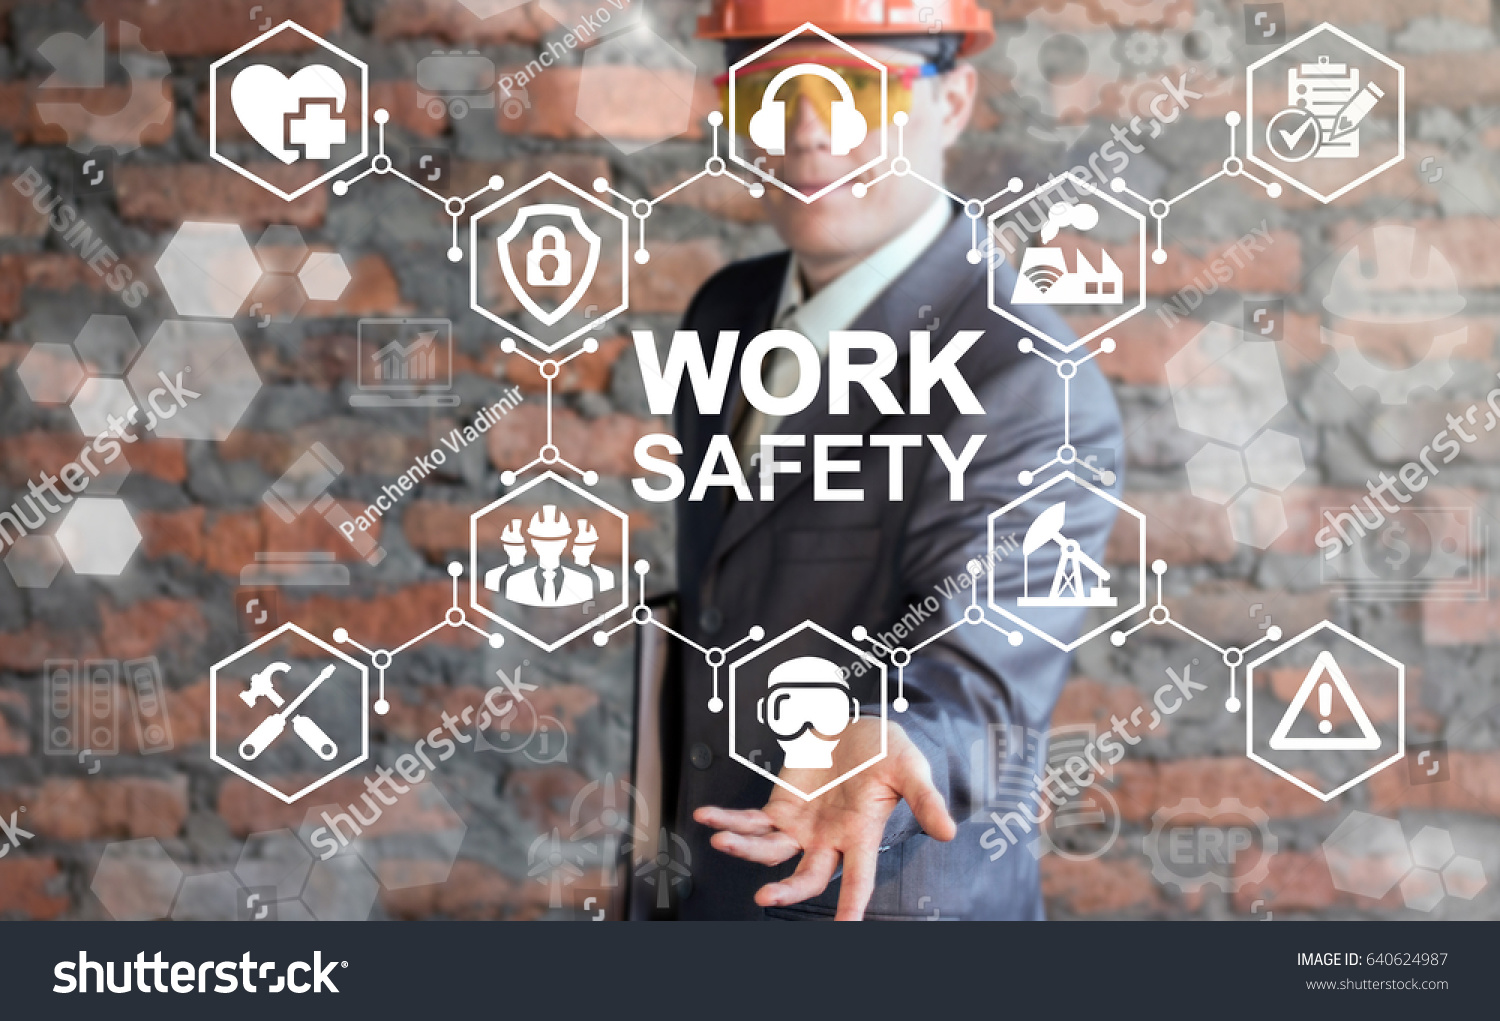 Work Safety Concept - regulations and standard in industry, business. First secure rules. Health protection, personal security people on job. Man in helmet offers work safety icon on virtual screen. #640624987